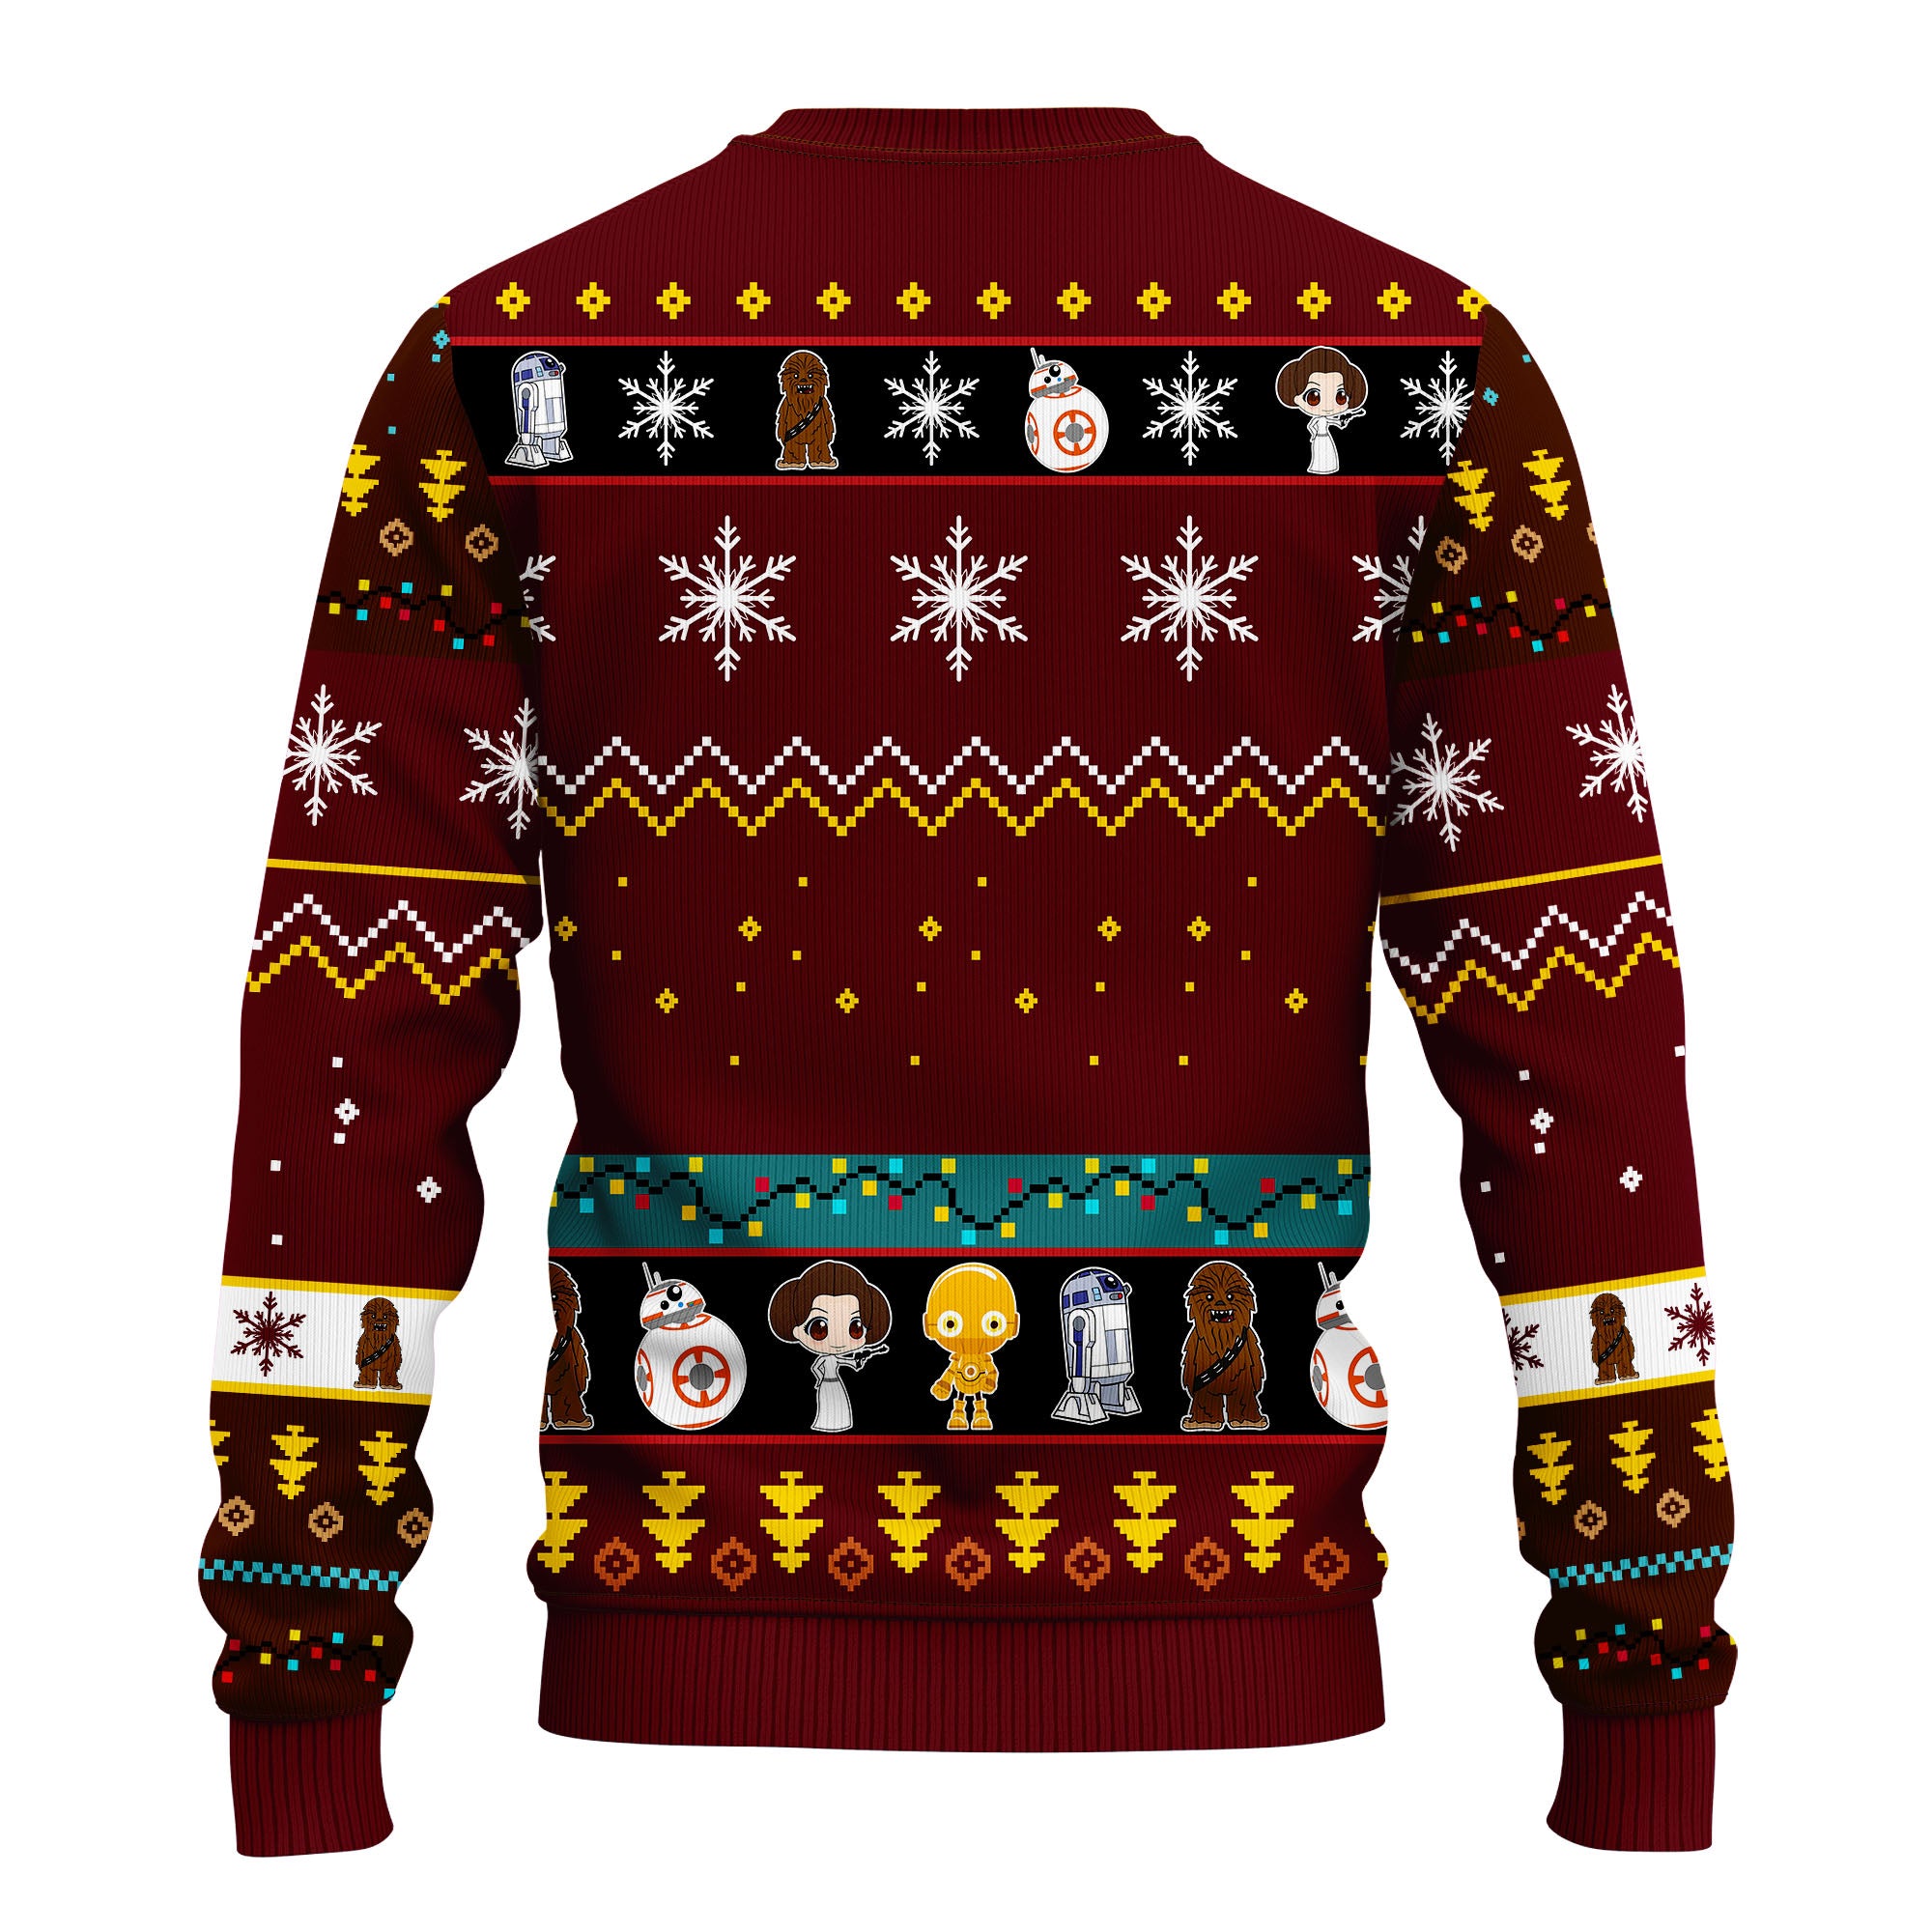 Star Wars Dark Ugly Christmas Sweater Amazing Gift Idea Thanksgiving Gift